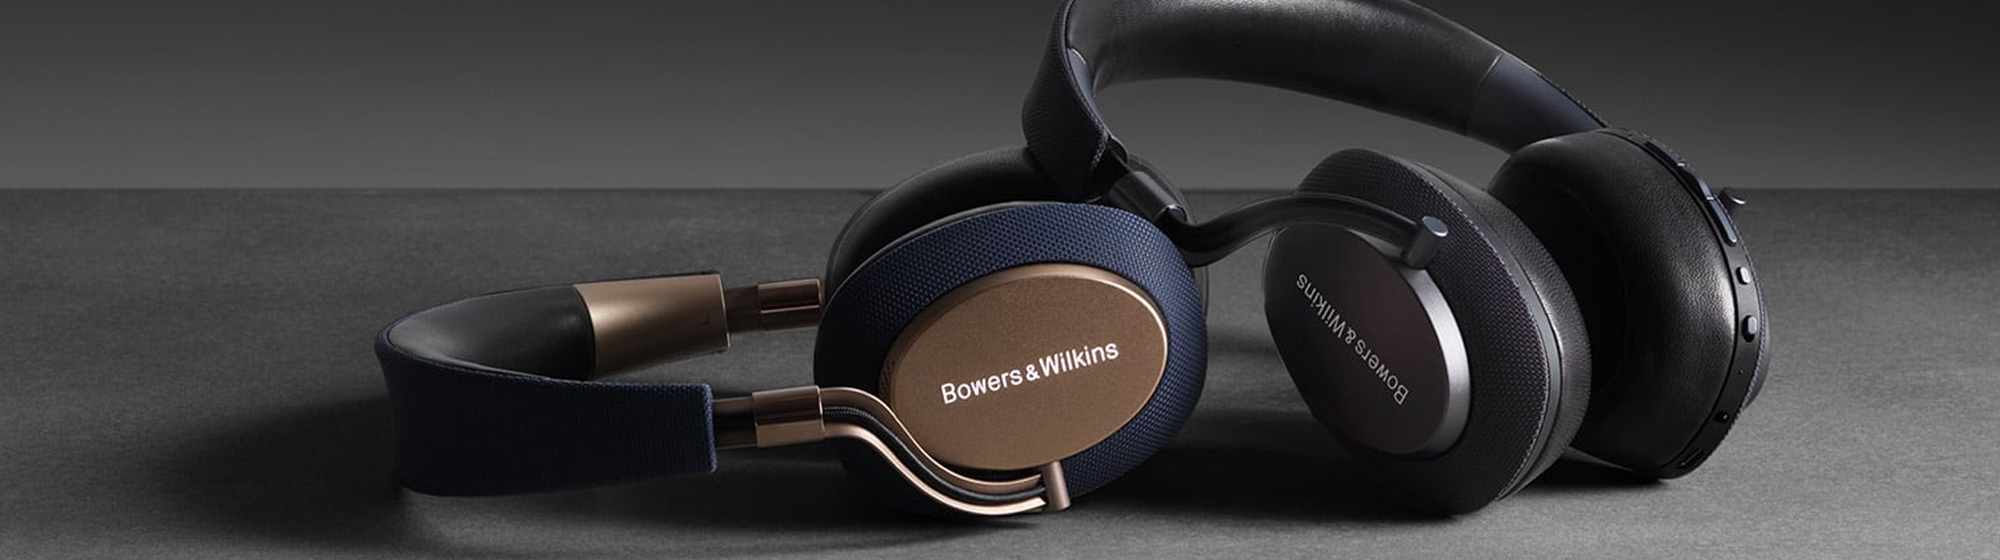 Case Study Bowers Wilkins